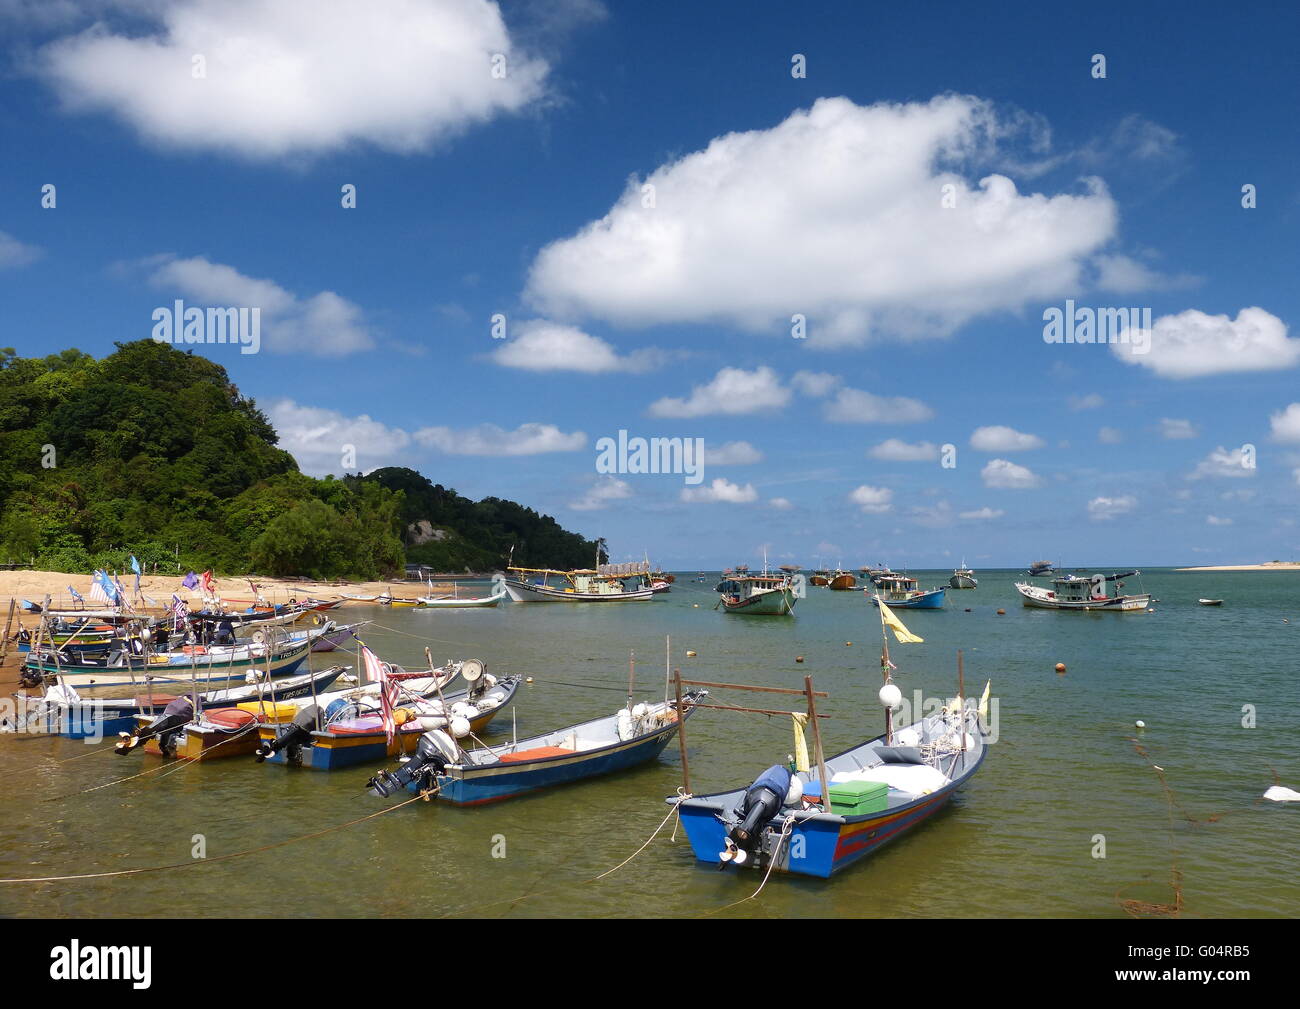 Motor speedboats berthed in a fishing village in the east coast of Malaysia under clear blue skies. Stock Photo